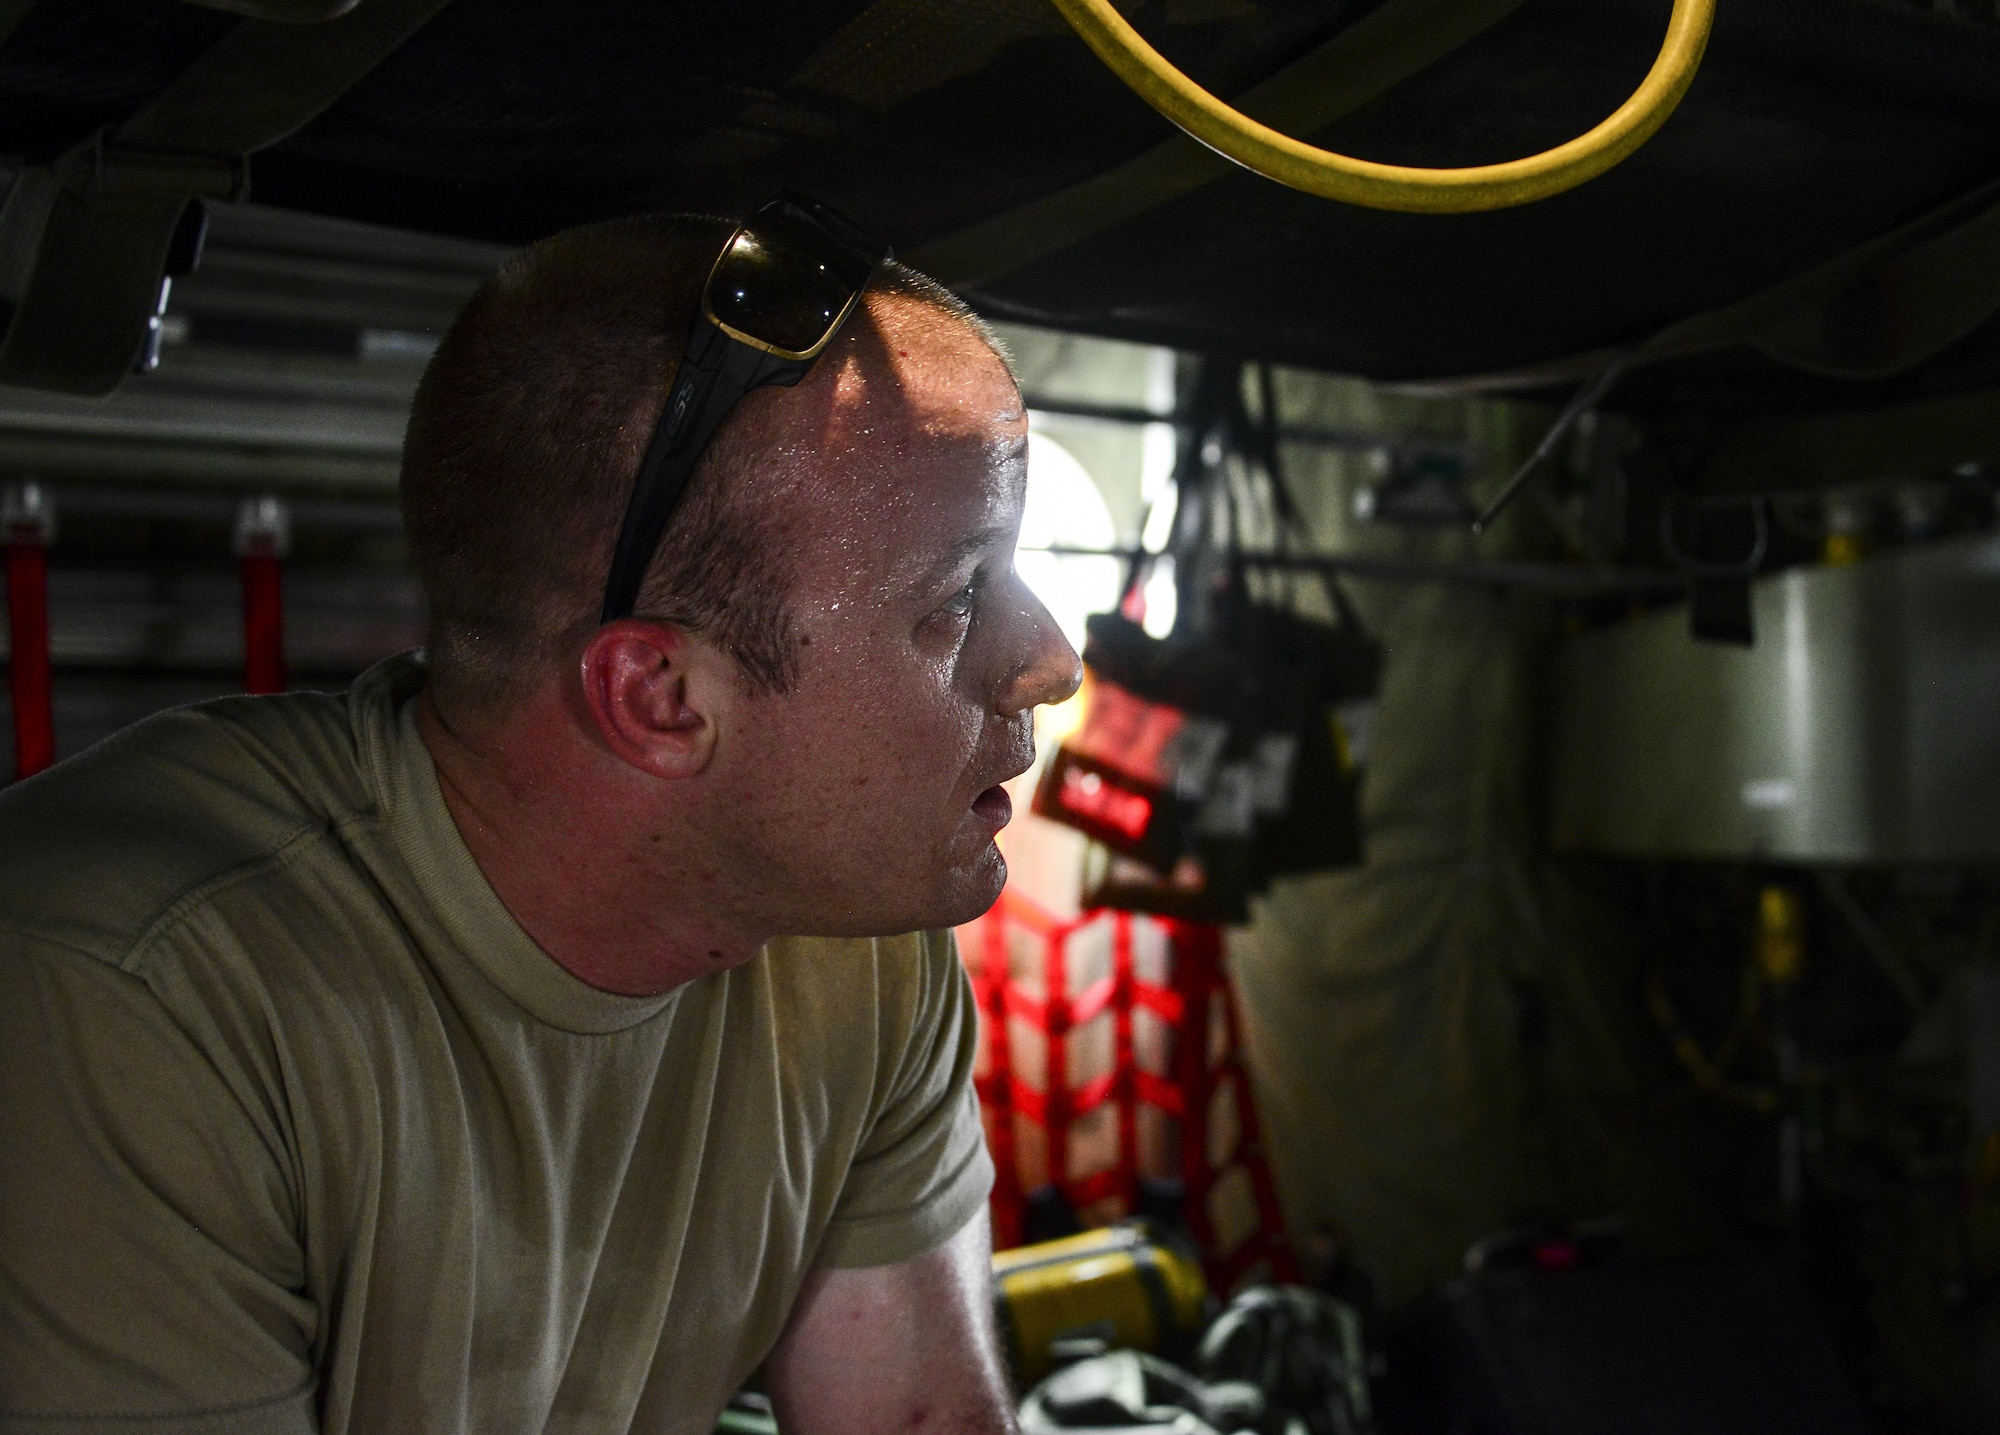 Staff Sgt. Andrew Harkcom, 379th Expeditionary Aeromedical Evacuation Squadron aeromedical evacuation technician, talks with team members while setting up a C-130 Hercules prior to cargo and passengers arriving July 28, 2016, at Al Udeid Air Base, Qatar. The equipment package for an aeromedical evacuation mission contains roughly about 1,200 to 1,400 pounds of equipment on each mission. (U.S. Air Force photo/Senior Airman Janelle Patiño/Released)